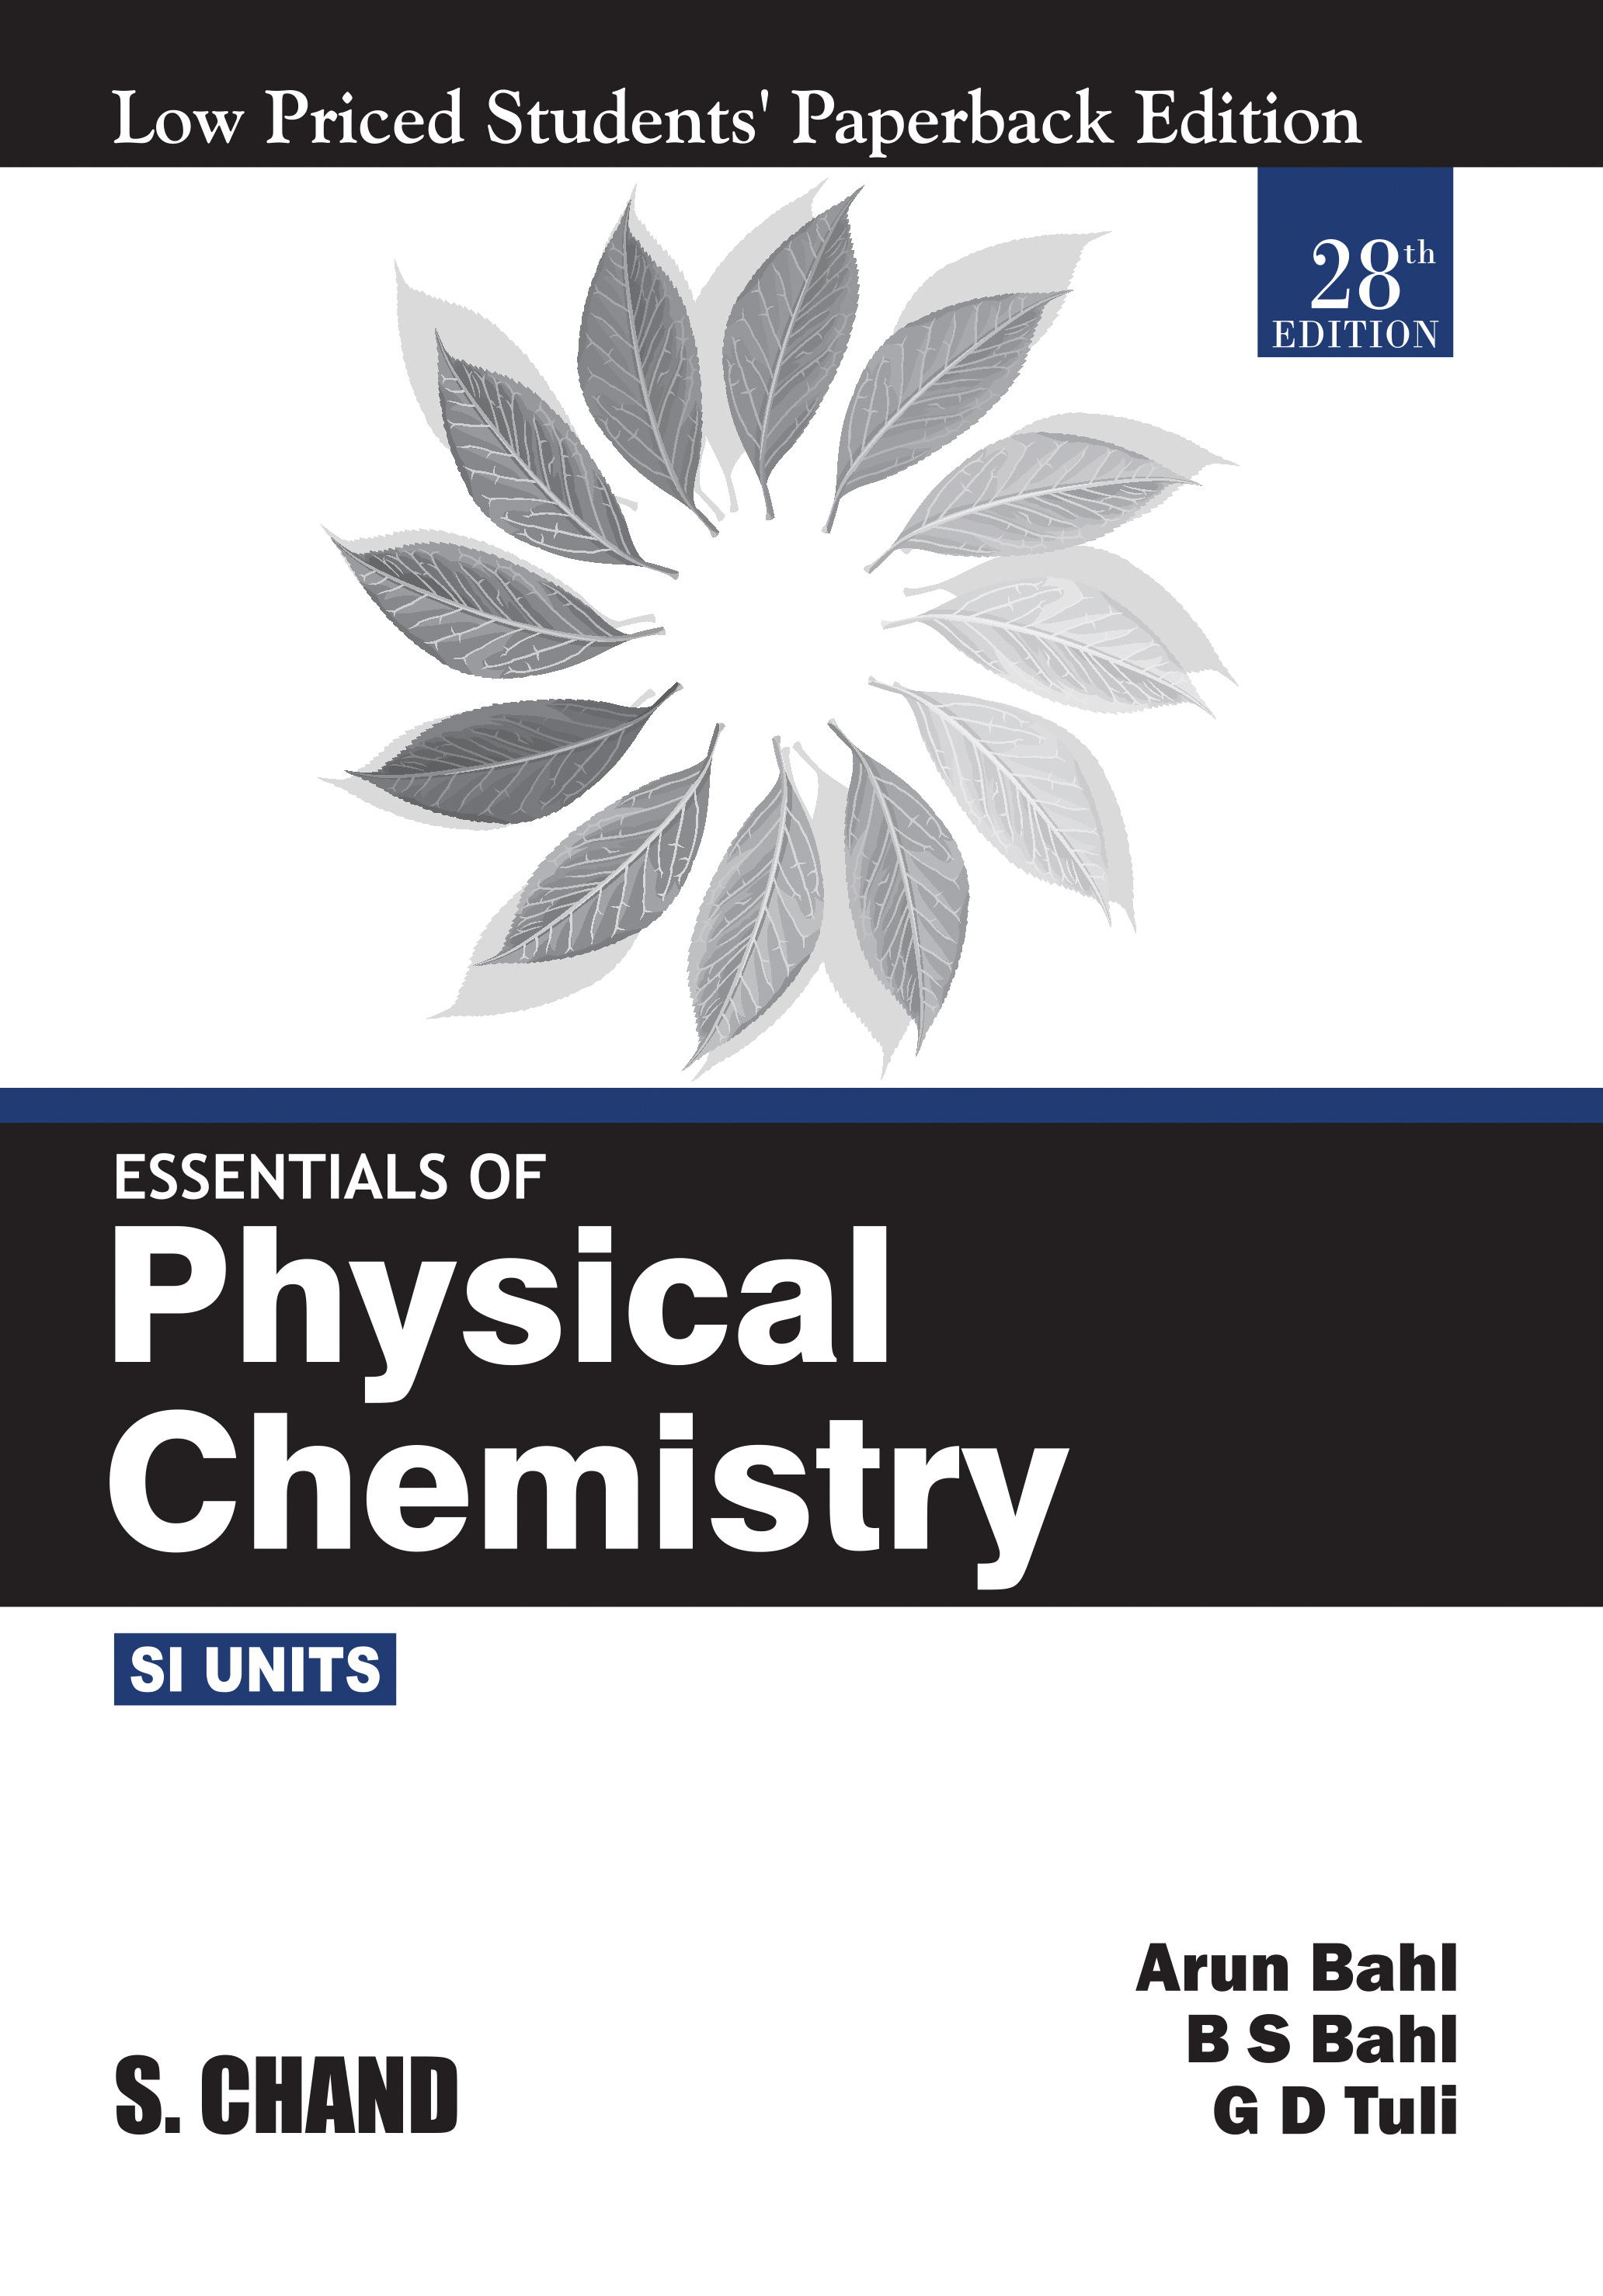 Essentials of Physical Chemistry (LPSPE)